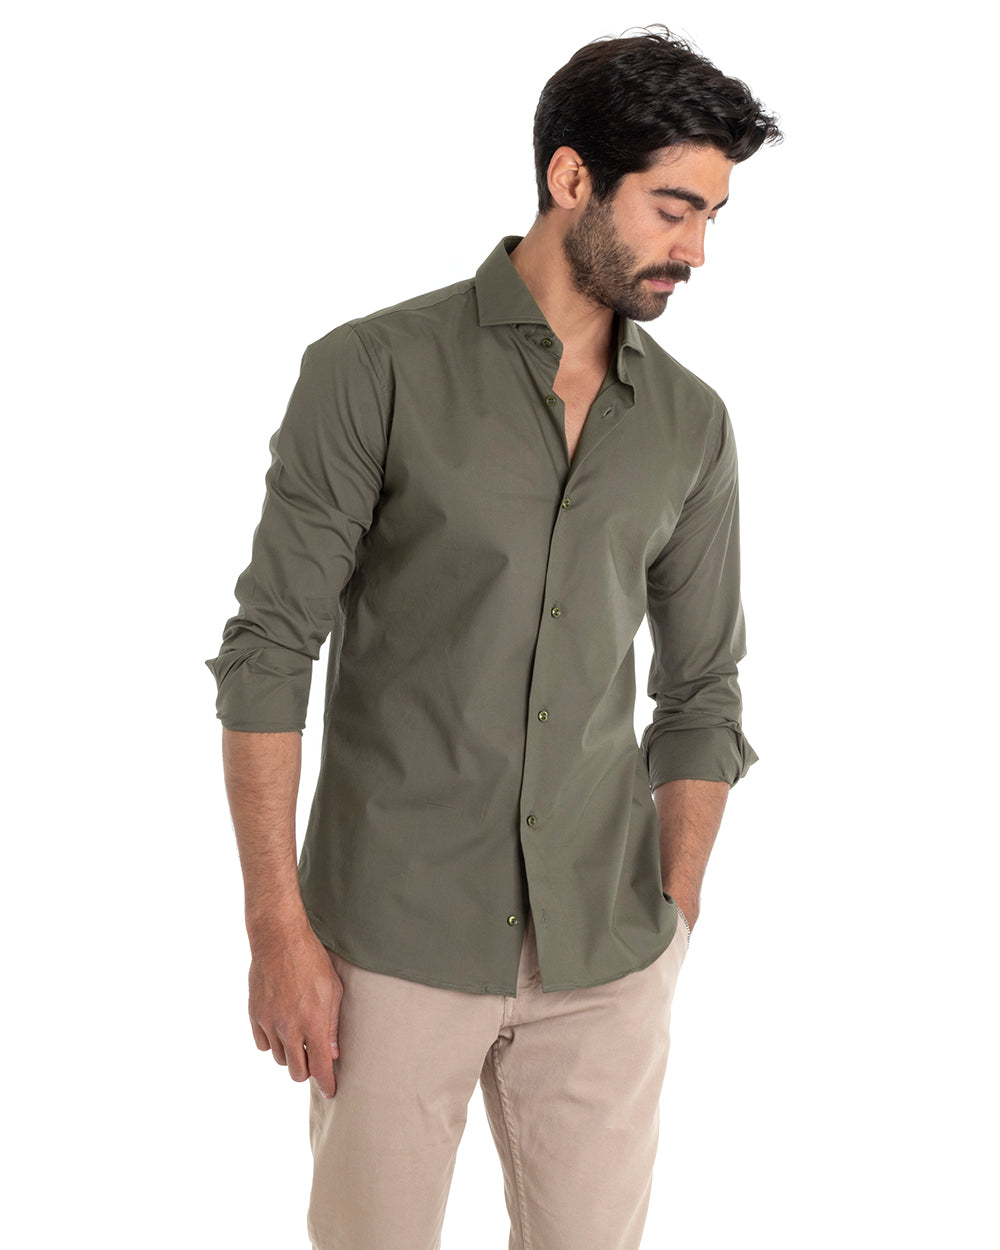 Men's Tailored Shirt With Collar Long Sleeve Basic Soft Cotton Military Green Regular Fit GIOSAL-C2401A